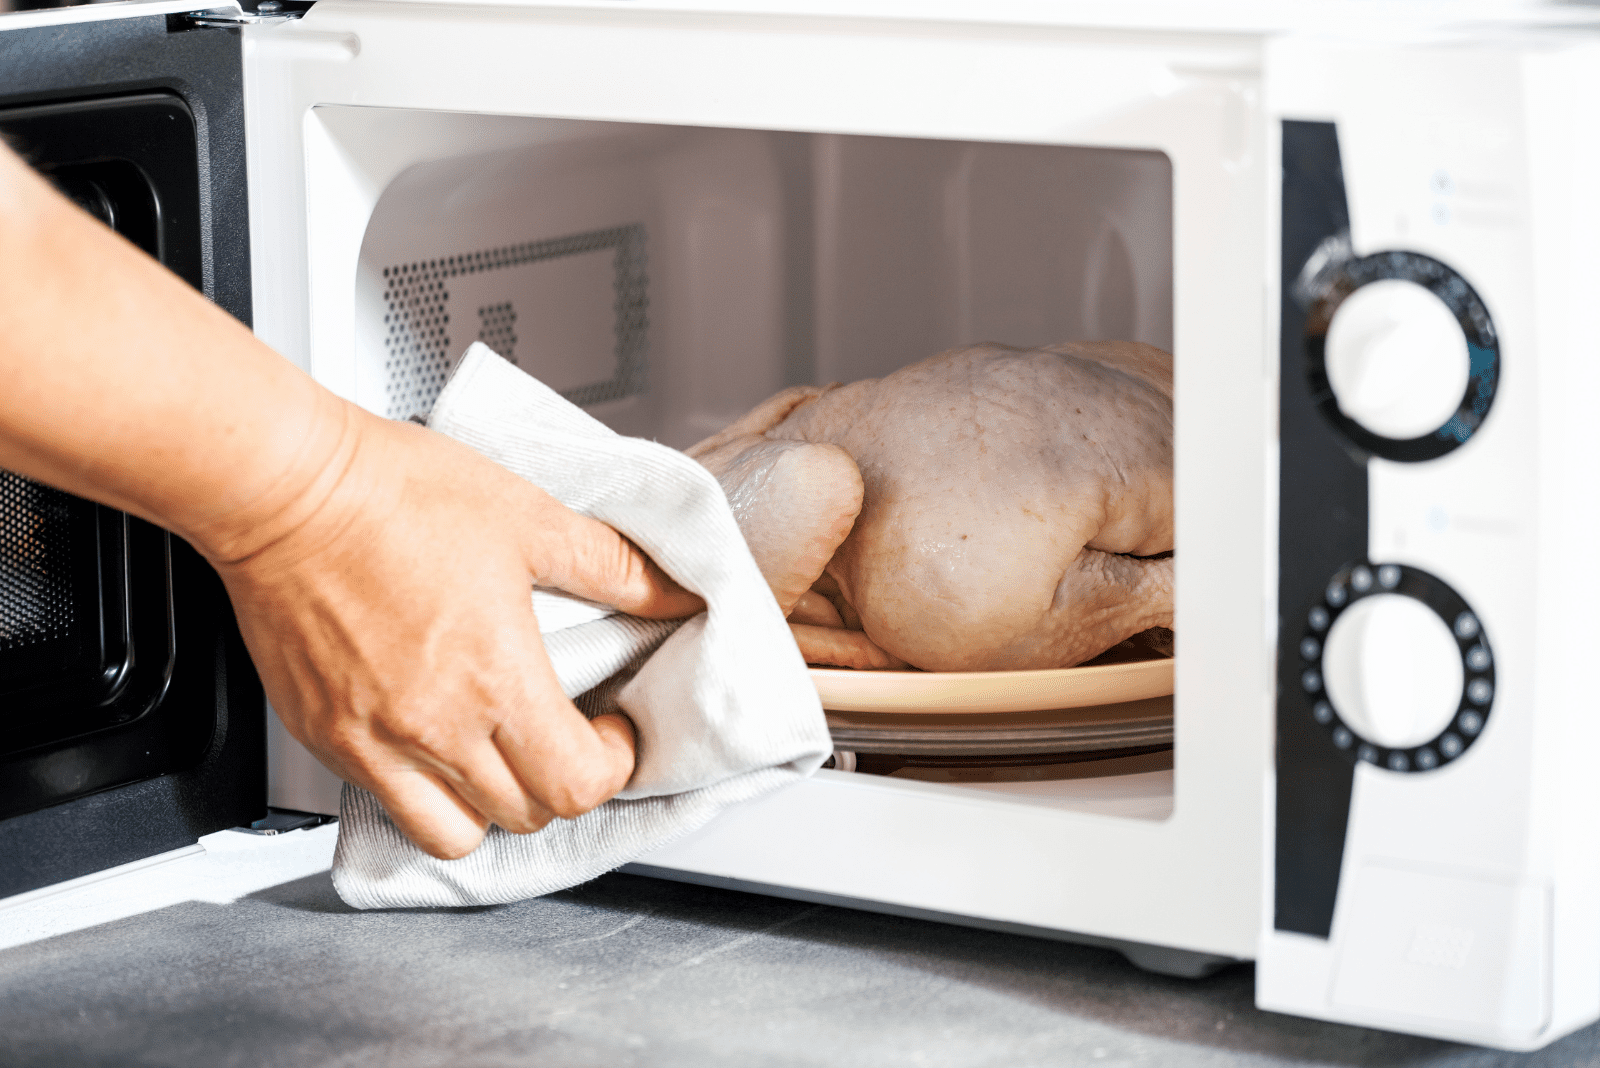 the woman takes the defrosted chicken out of the microwave